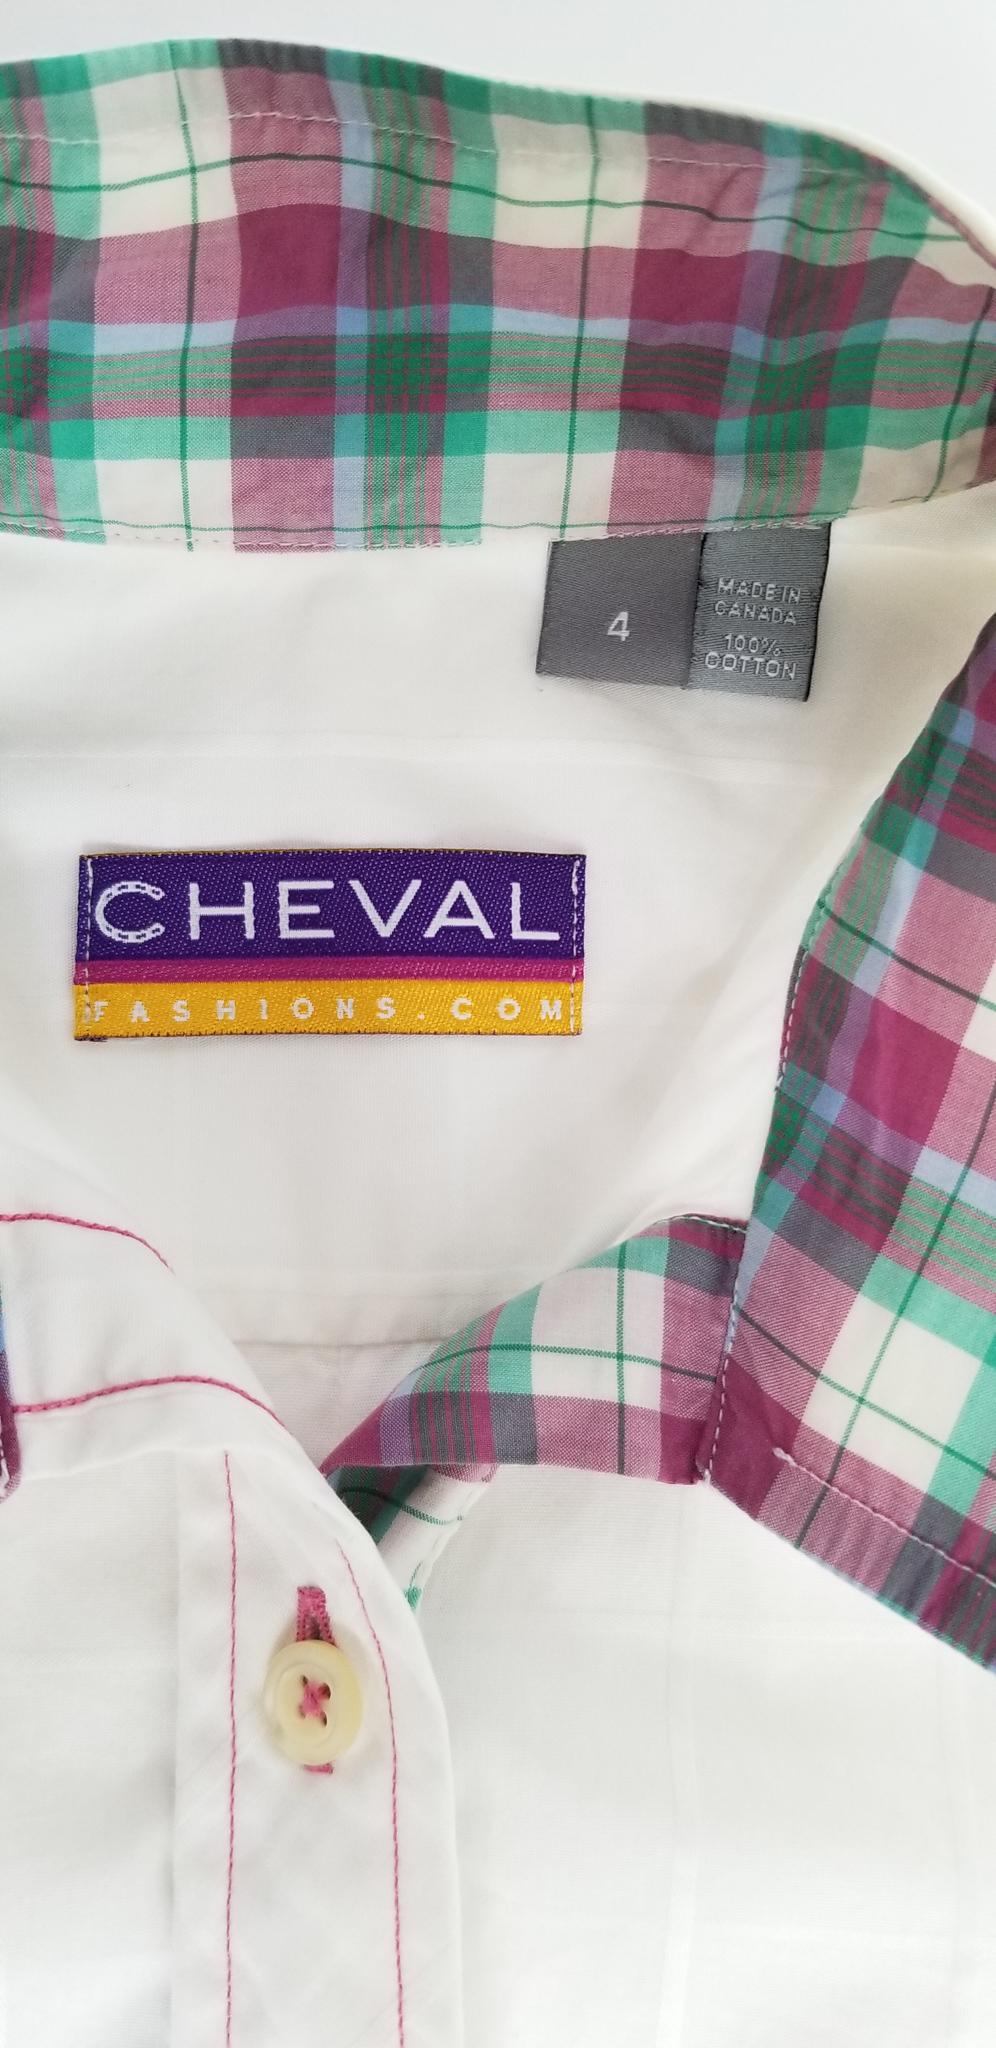 Cheval Fashions Competition Shirt - White (Pink Plaid Collar) - Women's 4